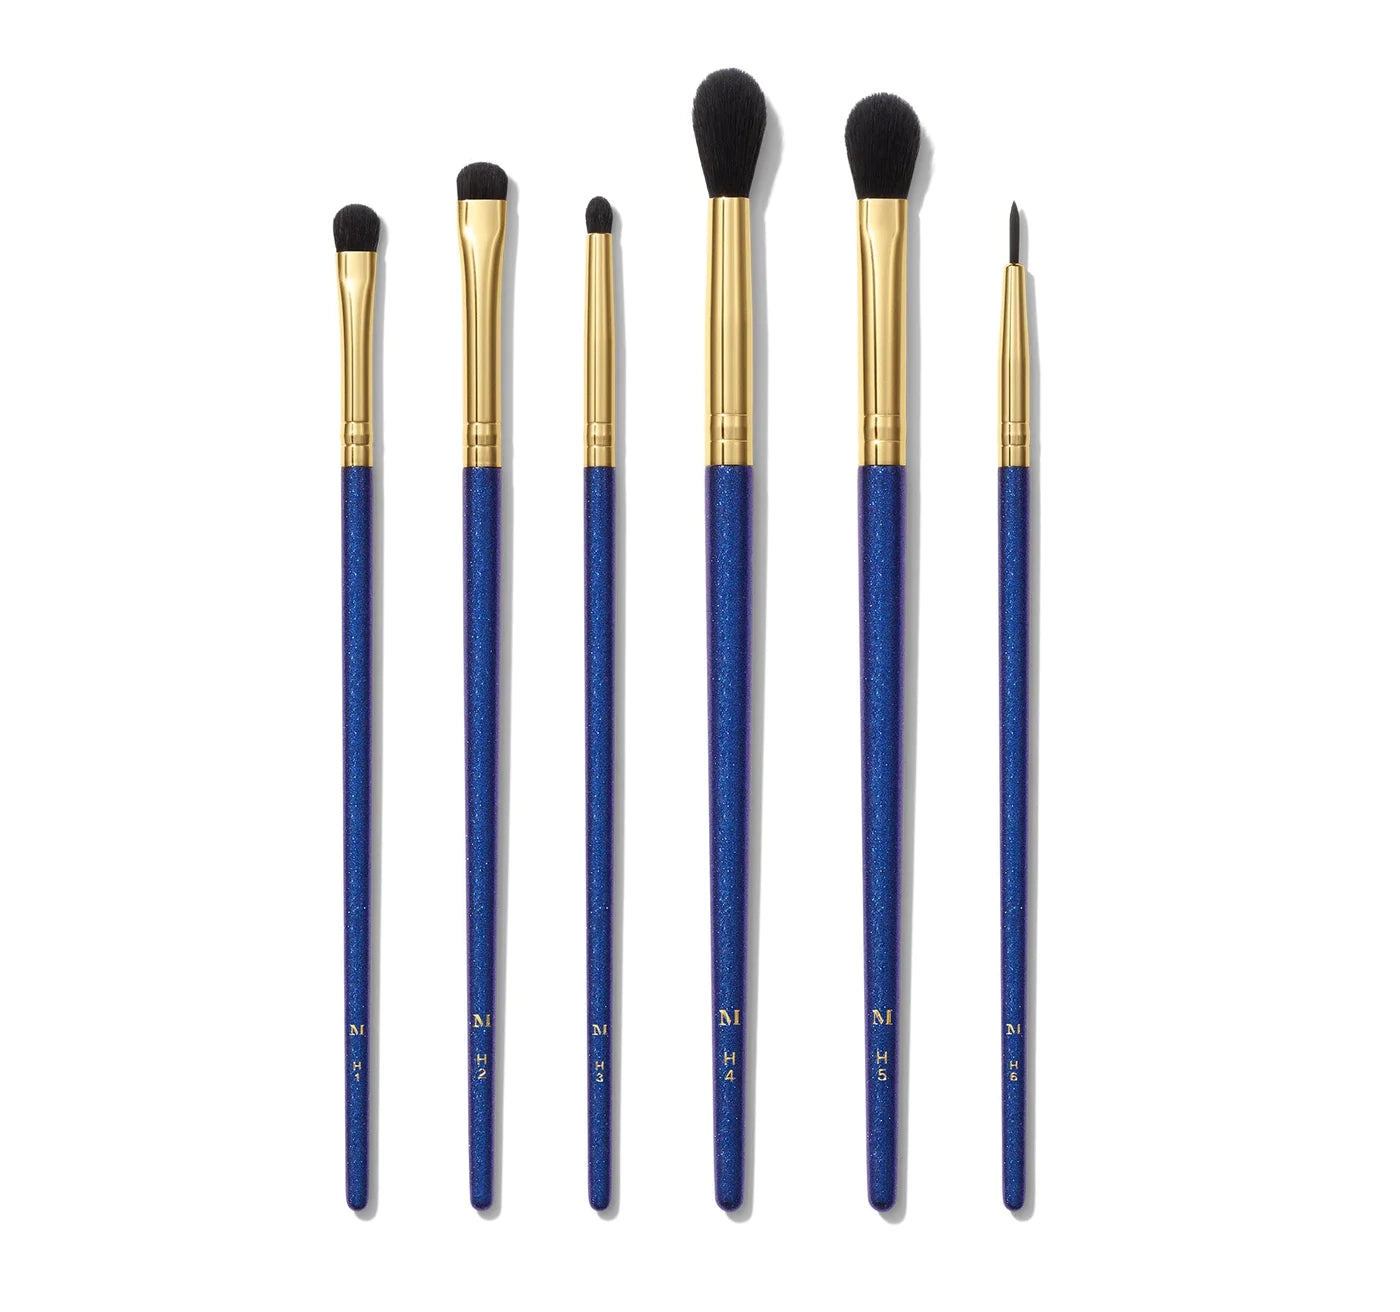 Shop 100% original Morphe eye makeup brush set available at Heygirl.pk for delivery in Pakistan